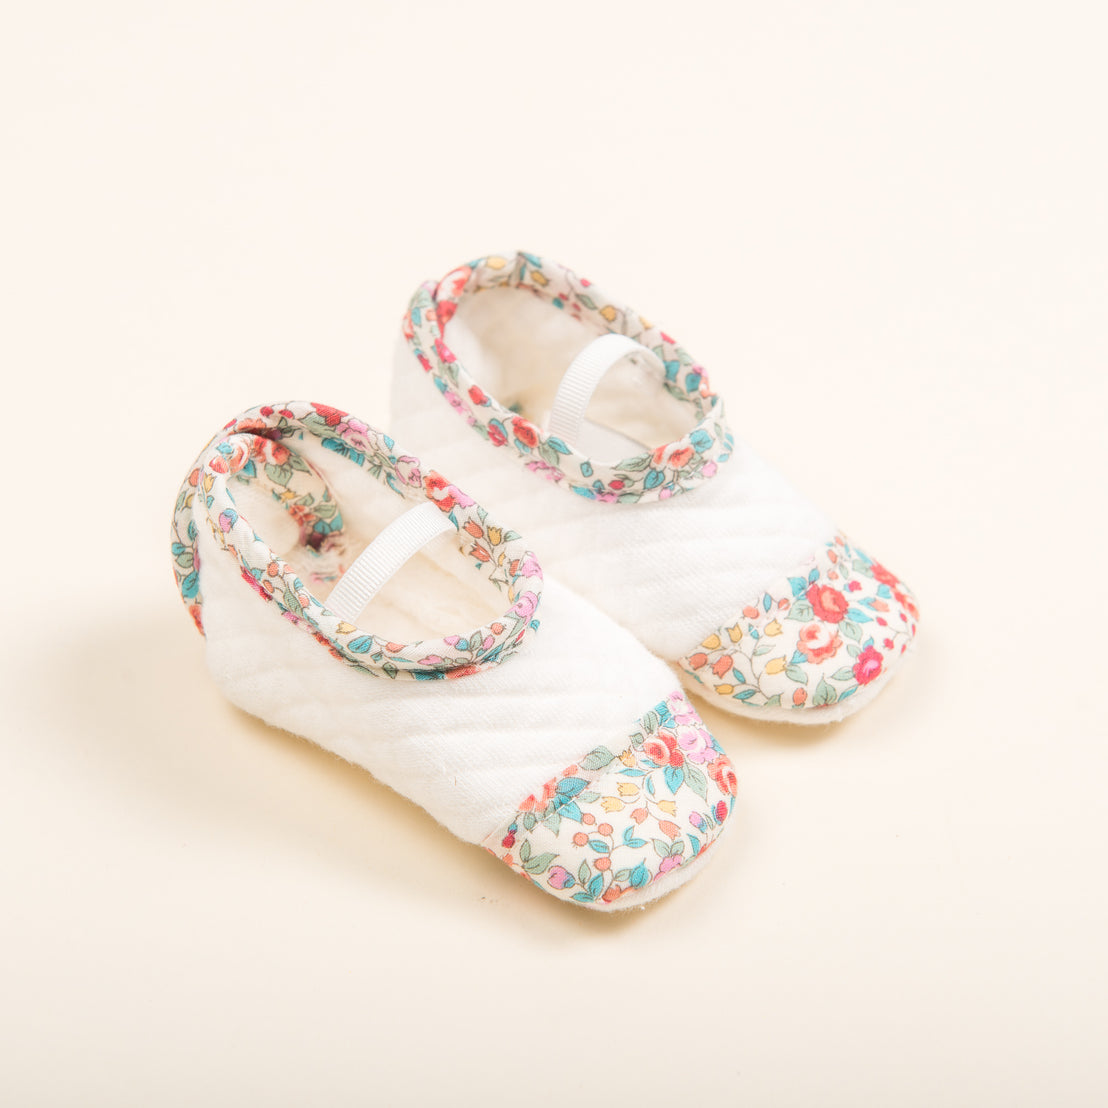 A pair of Petite Fleur Quilted Booties on a soft beige background. The shoes feature small floral prints in various colors and white straps across the tops.